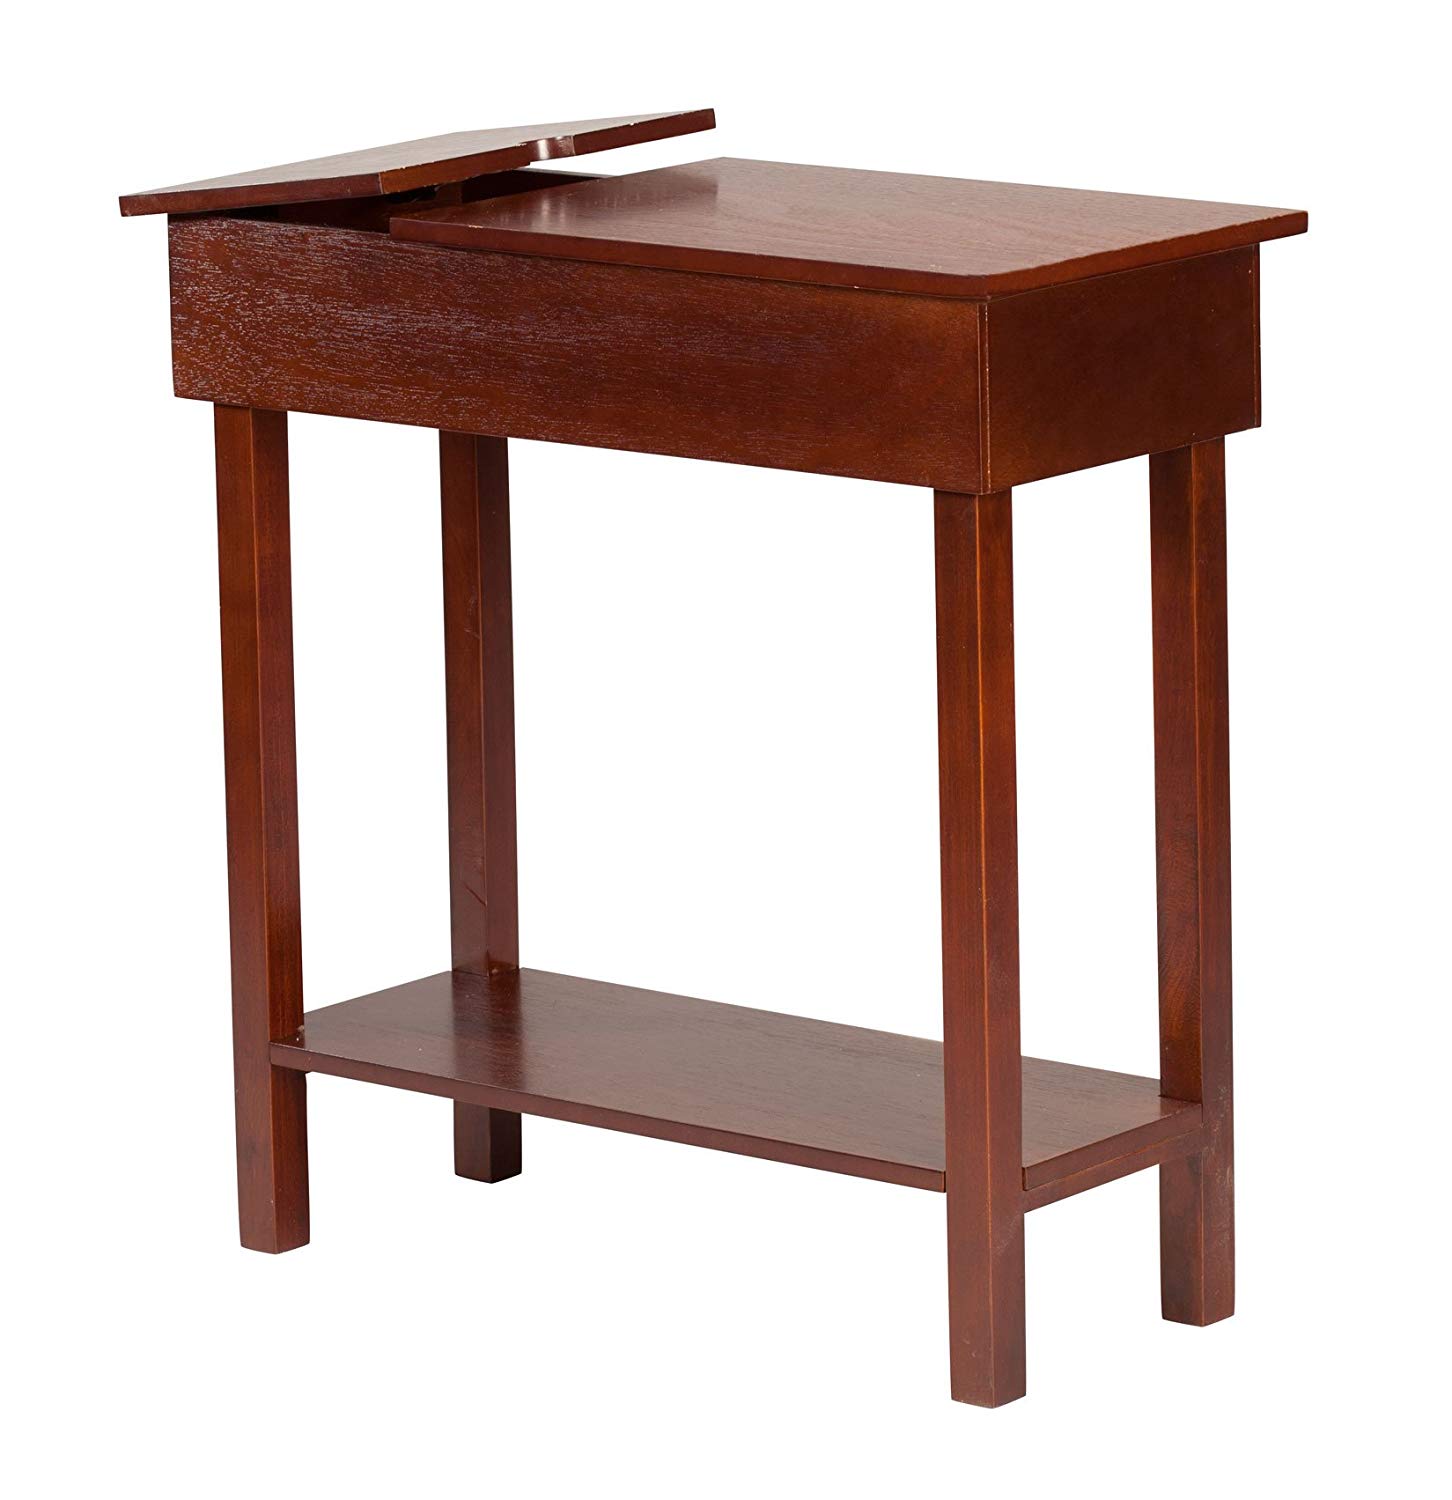 oakridge chairside table with usb power strip vtnel accent wide brown wood finish kitchen dining cement side battery operated lights lamps round marble end console cabinet